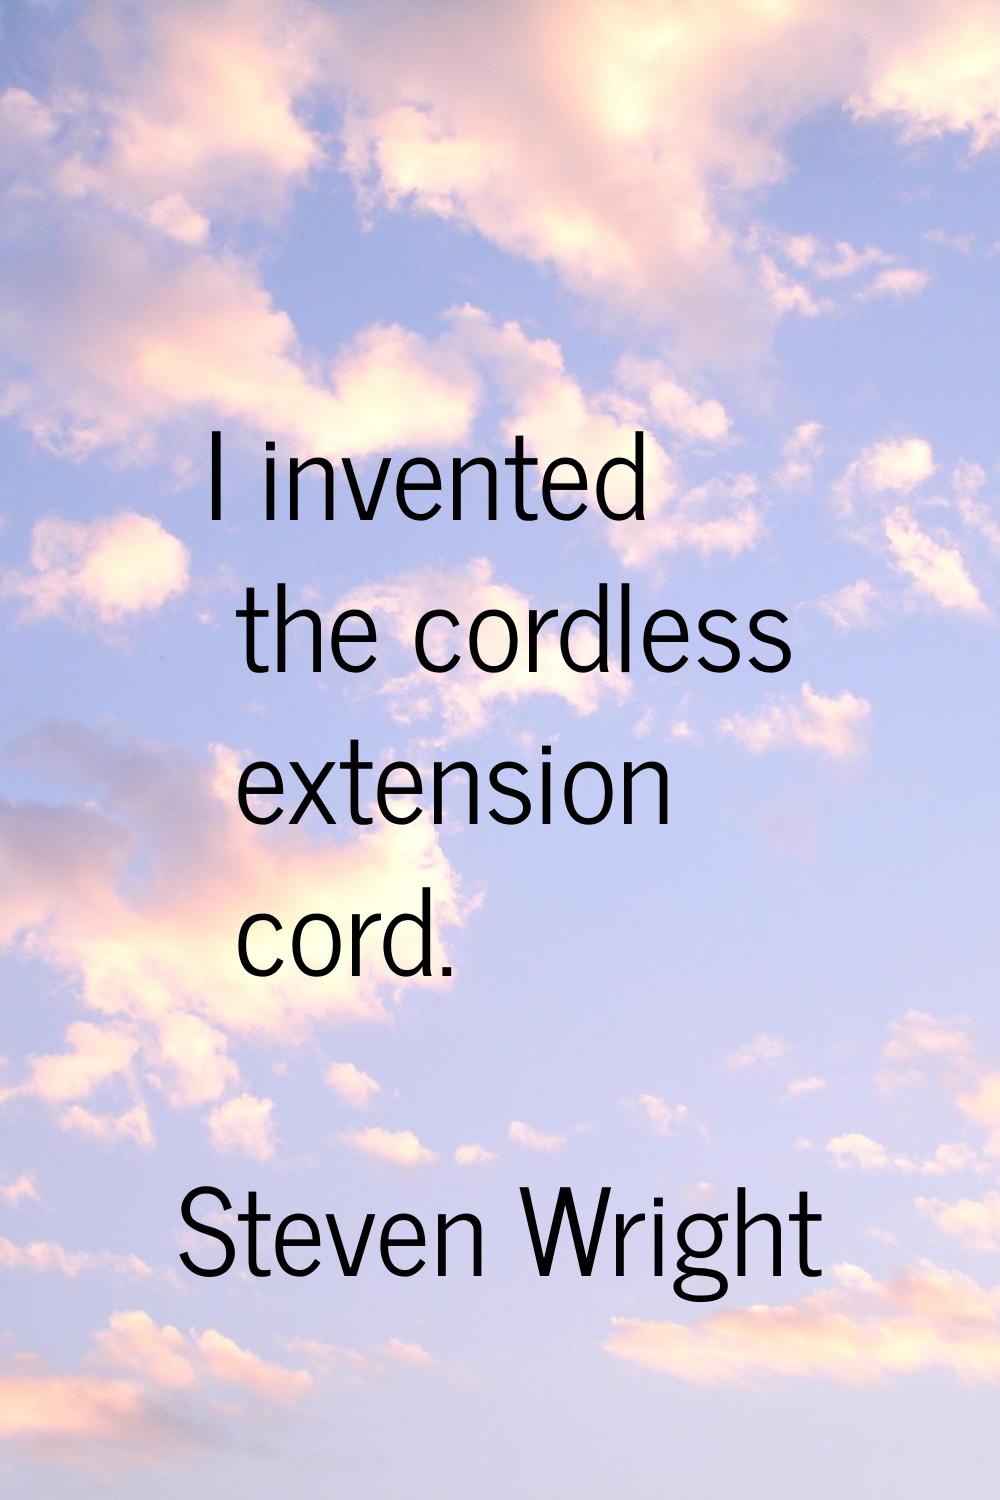 I invented the cordless extension cord.